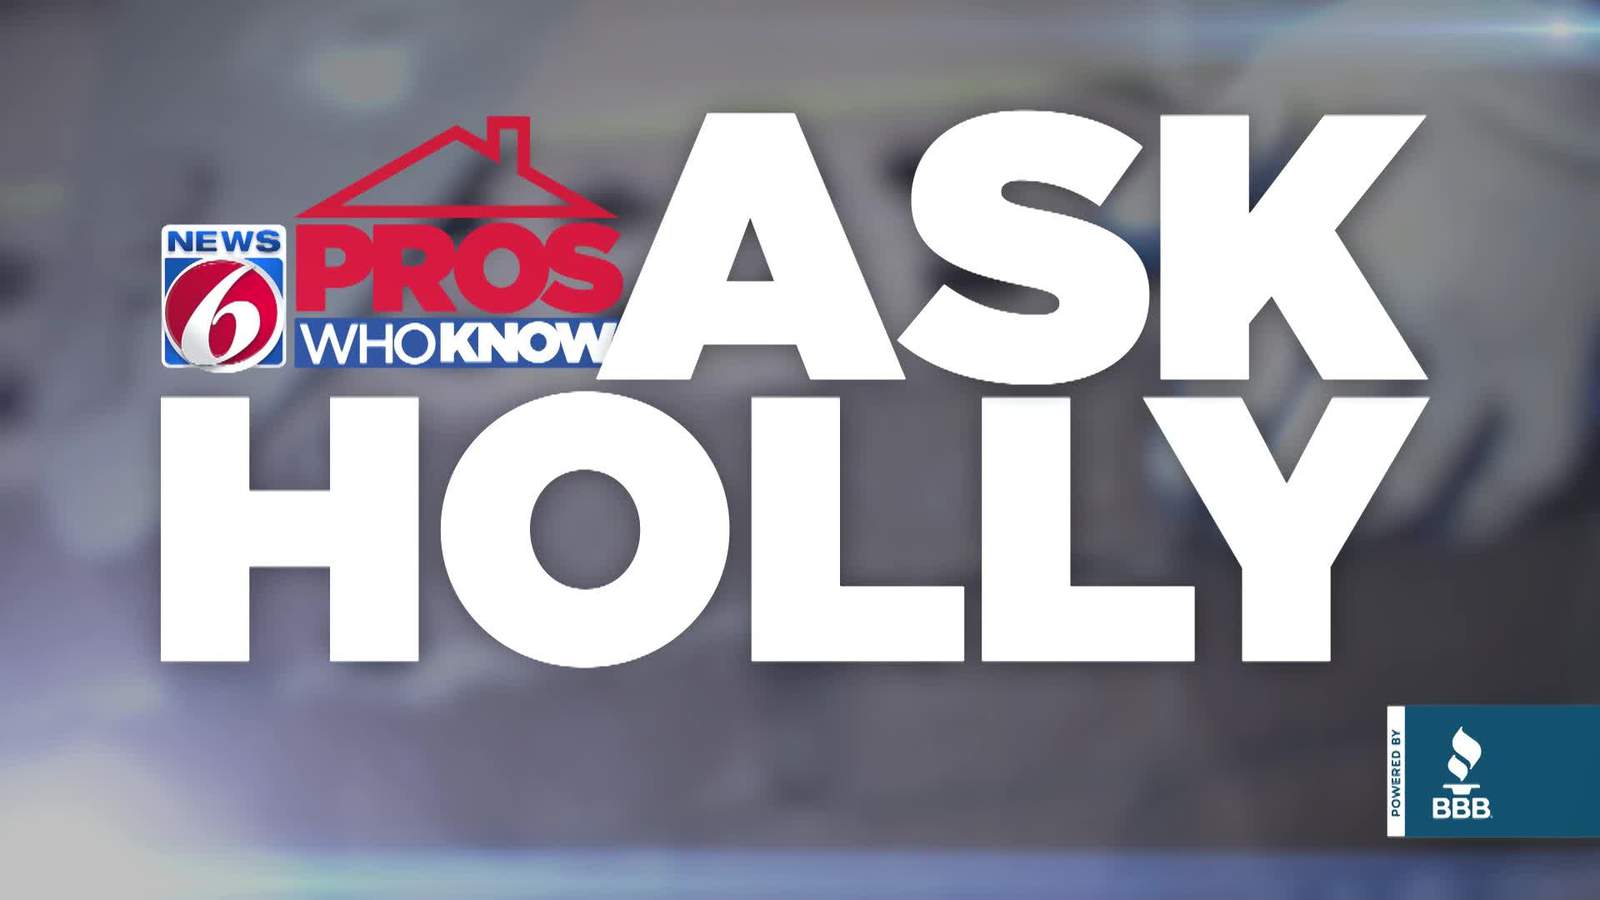 Ask Holly: What are some of the not-so-obvious ways I can protect my identity?